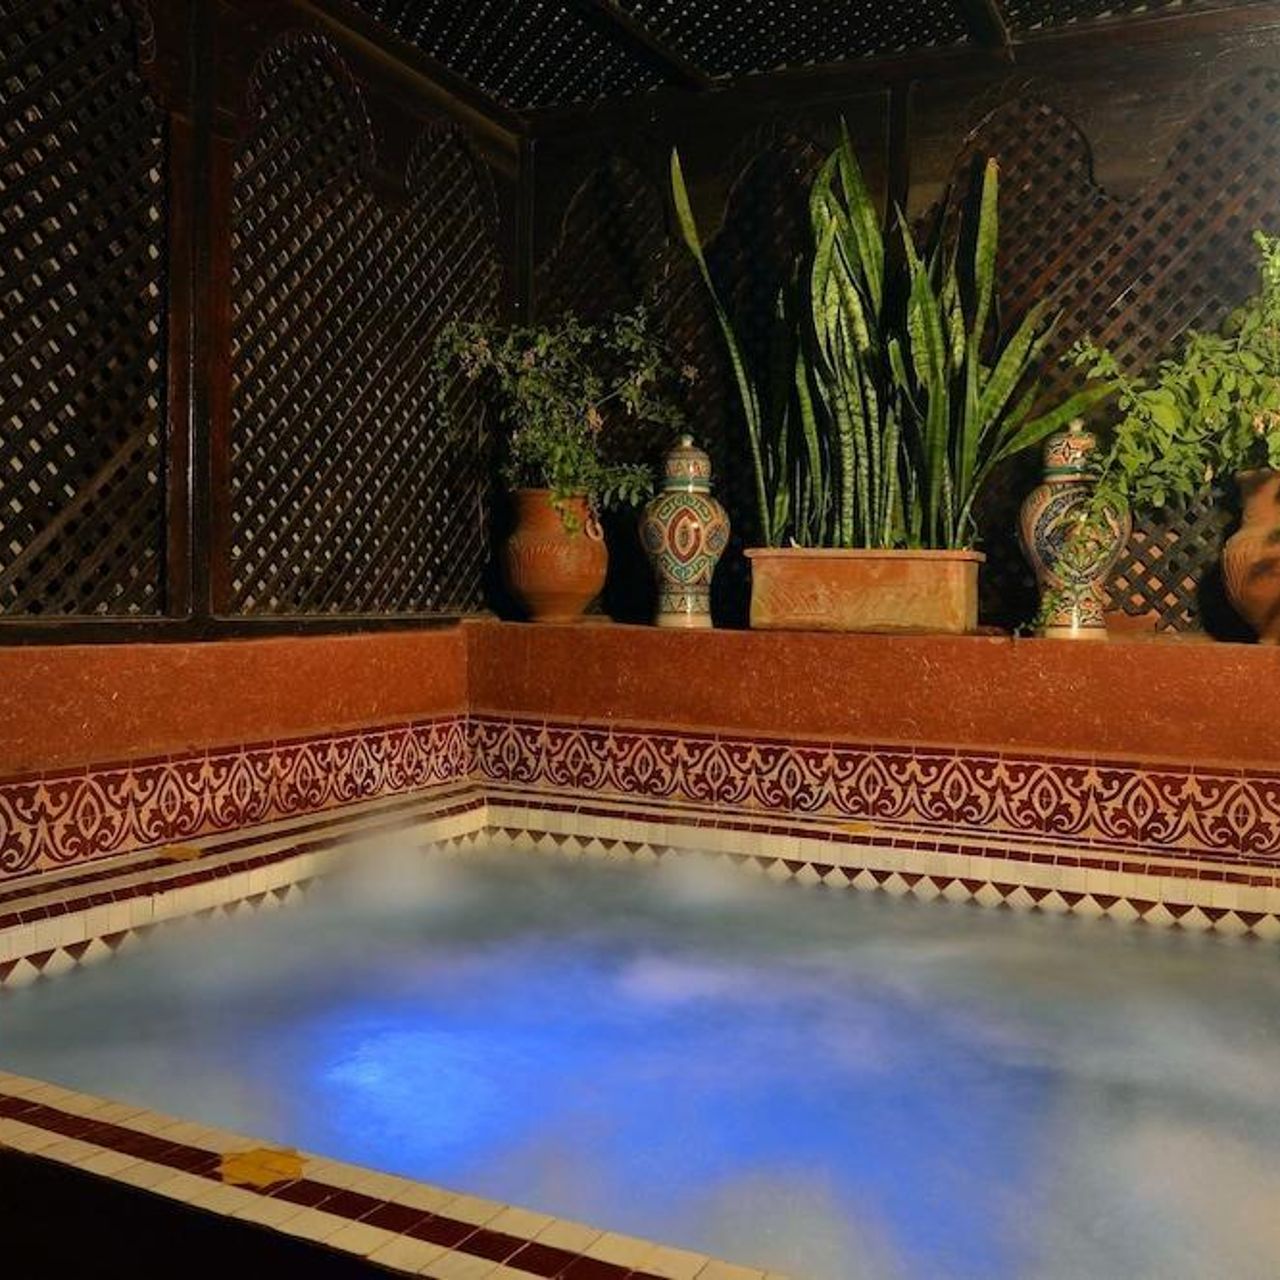 Hotel Riad La Porte Rouge - Marrakech - Great prices at HOTEL INFO